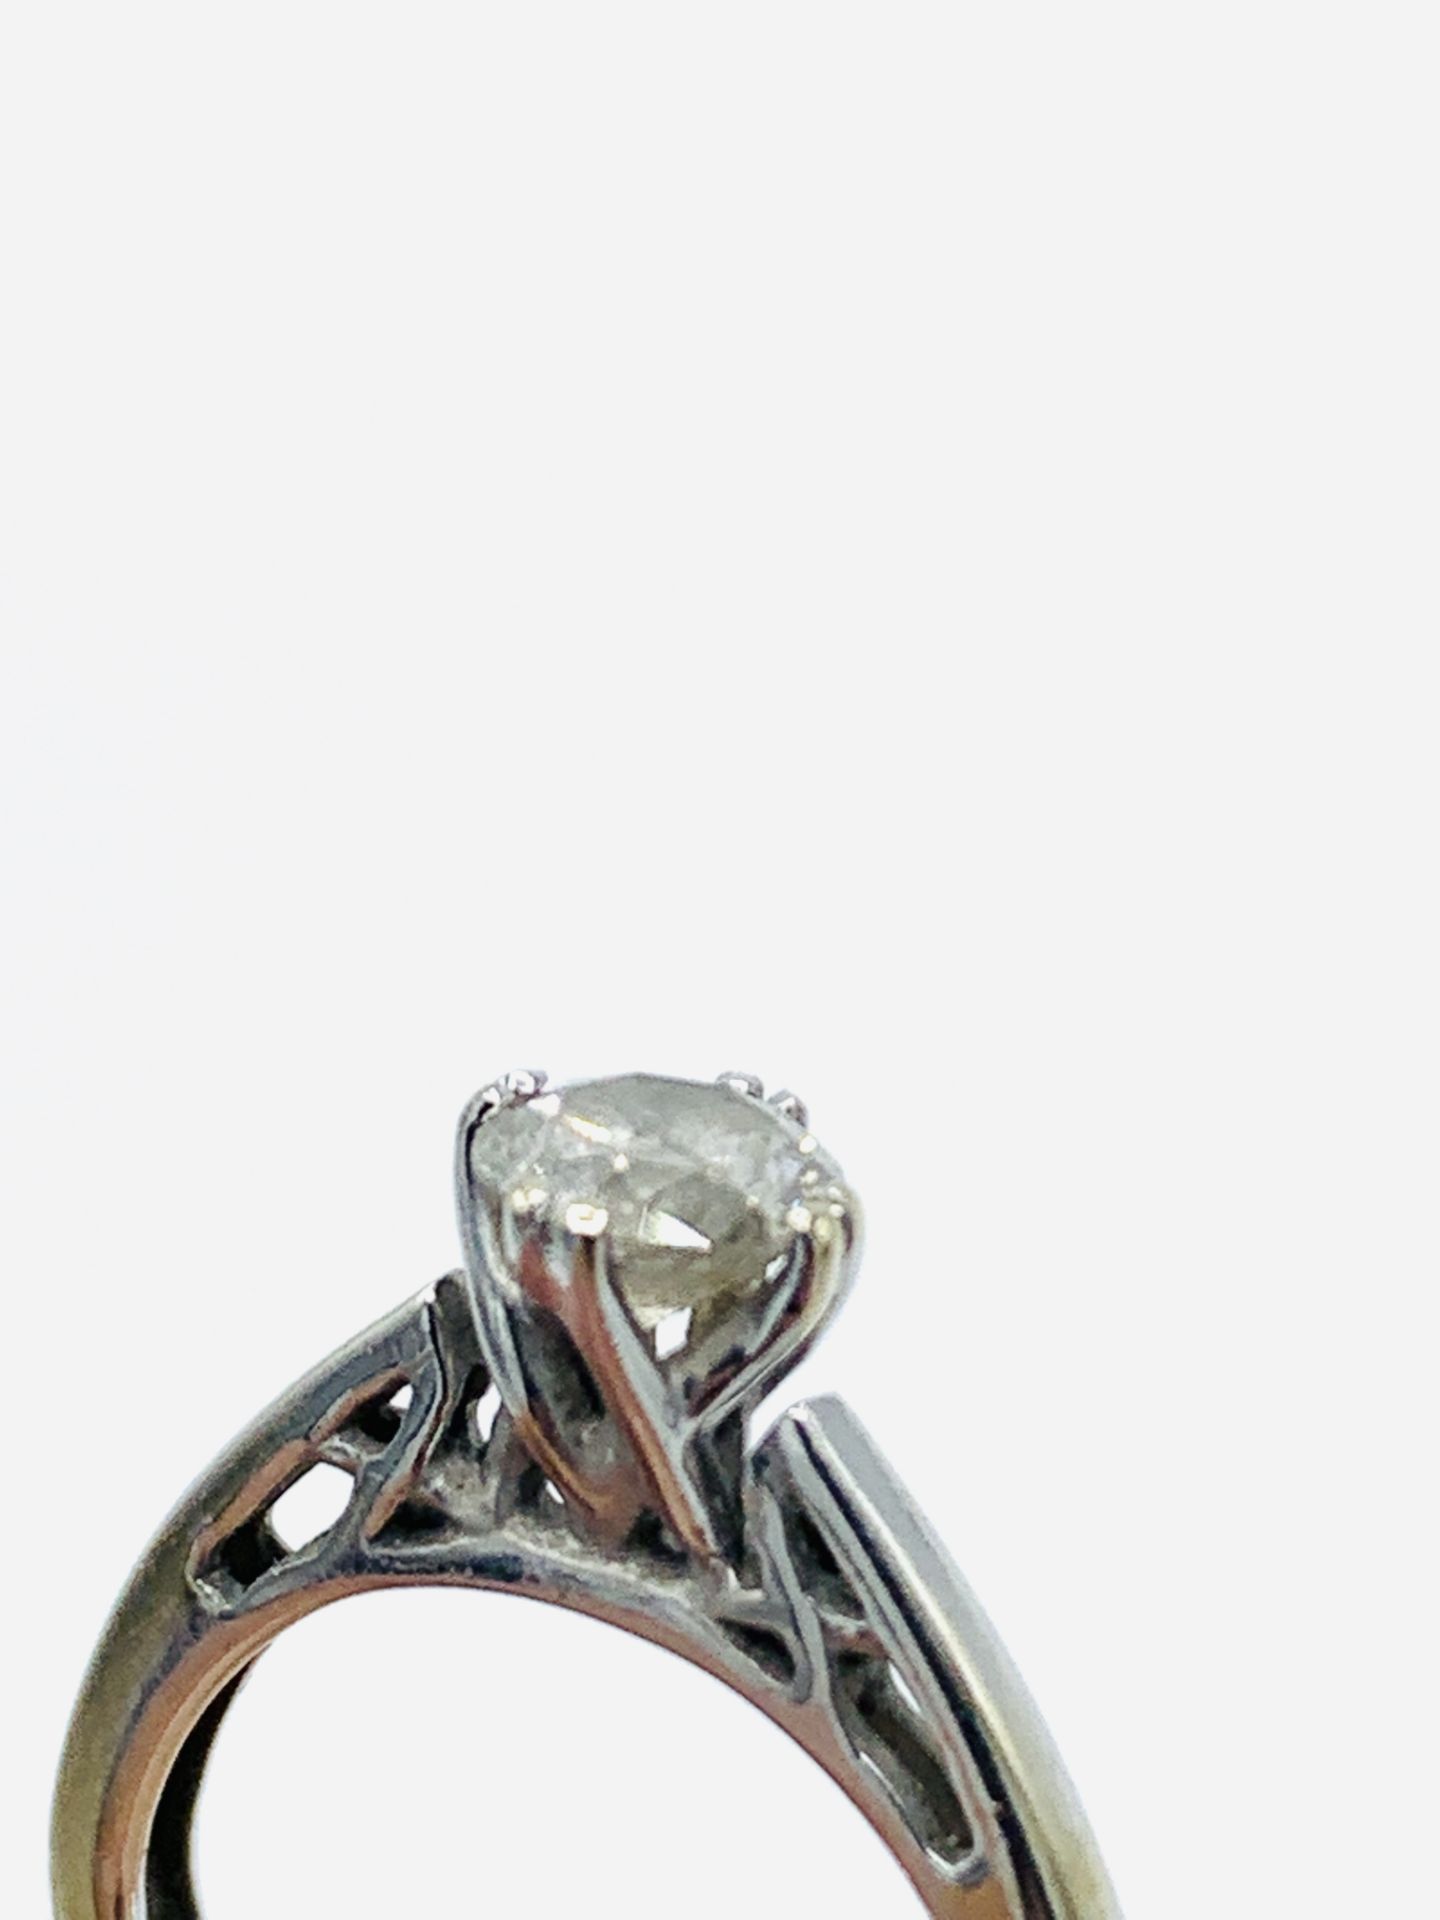 18ct white gold solitaire diamond ring - Image 3 of 4